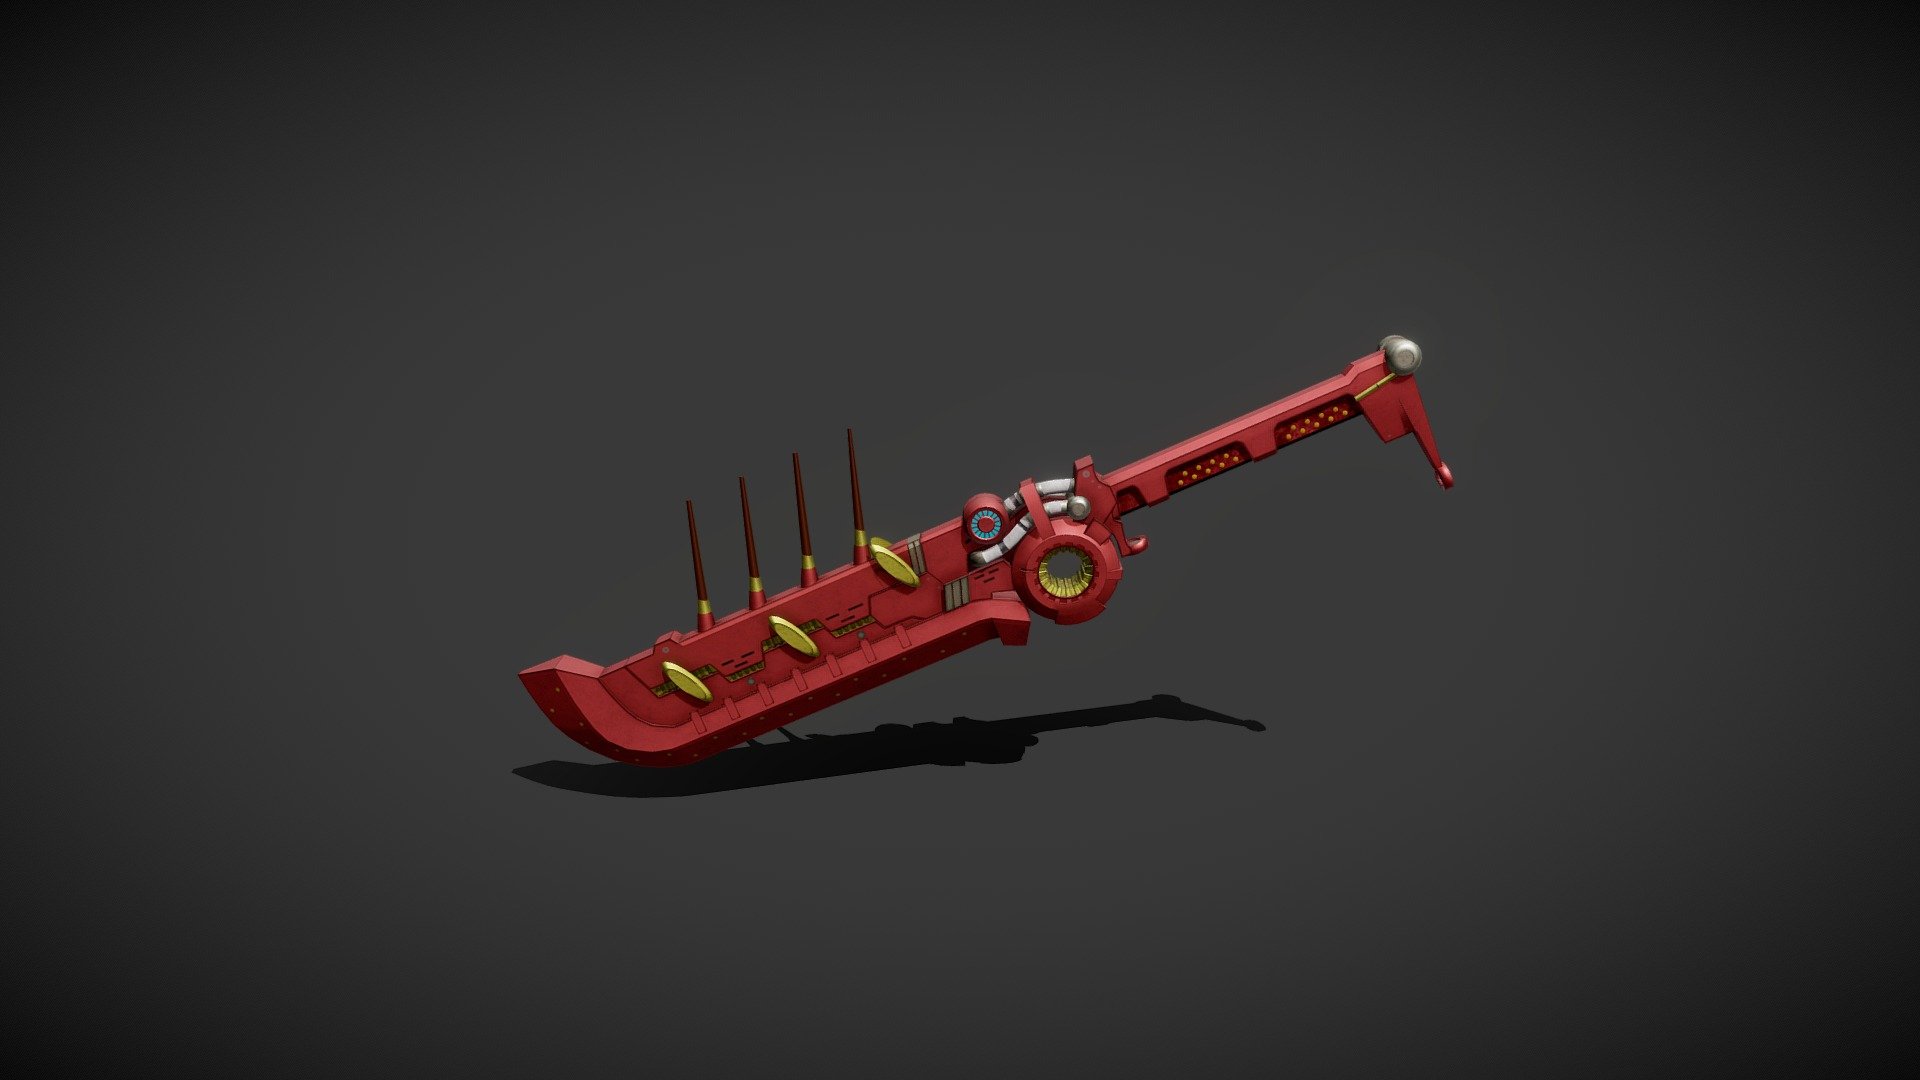 Xenoblade Chronicle Monado Sword made with Maya.
Texture Painted in Substance Painter.
Around 6099 Faces 3d model